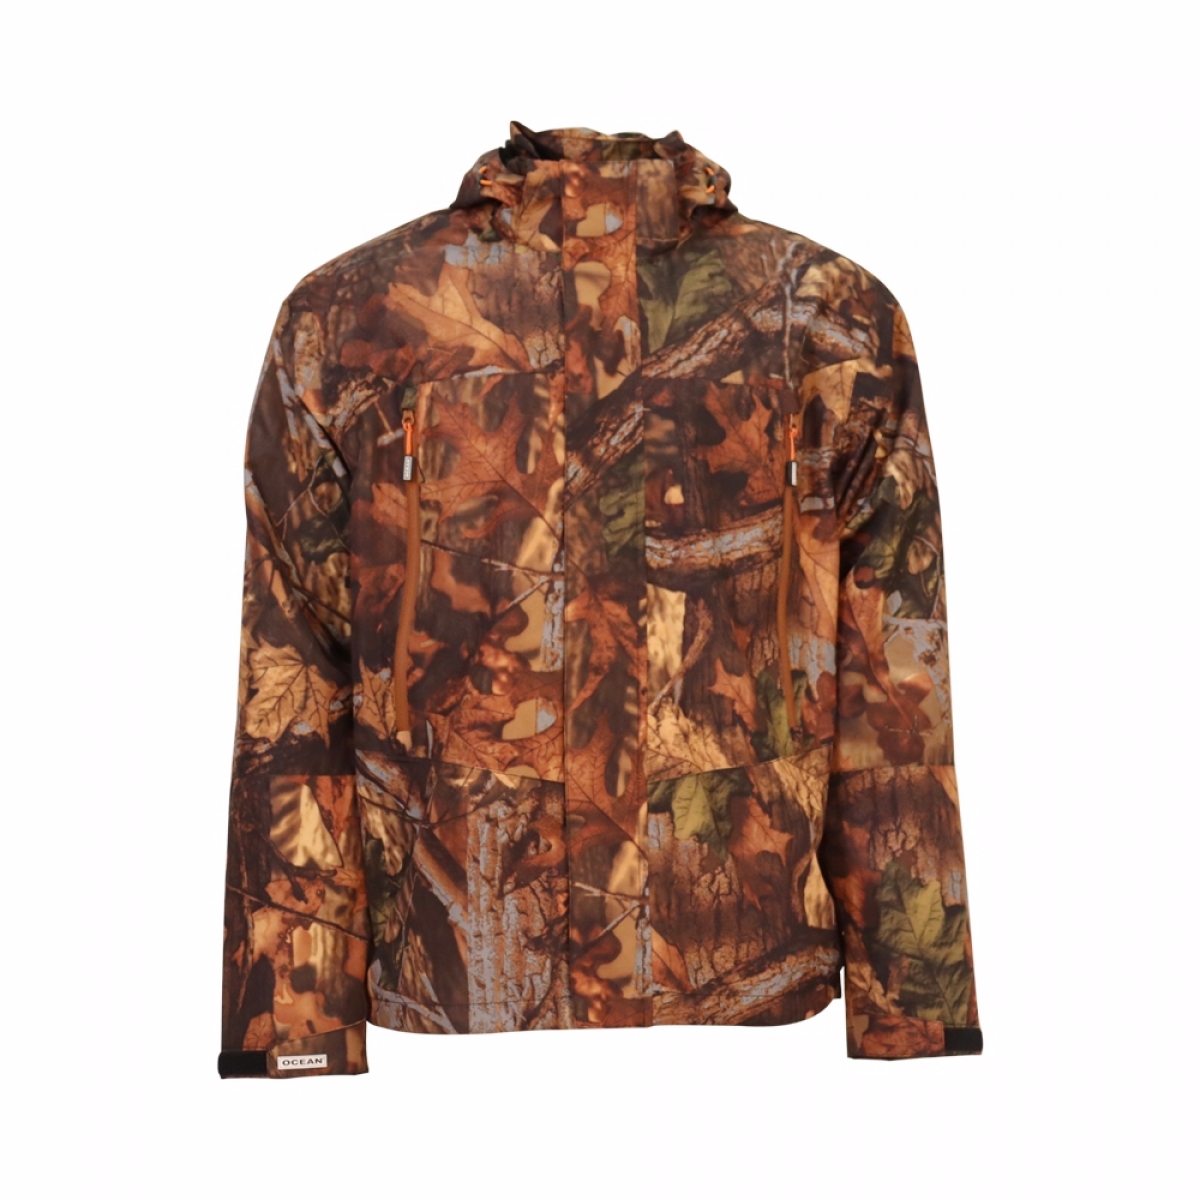 OCEAN-Outdoor-High-Performance-Jacke, 132 g/m, camouflage